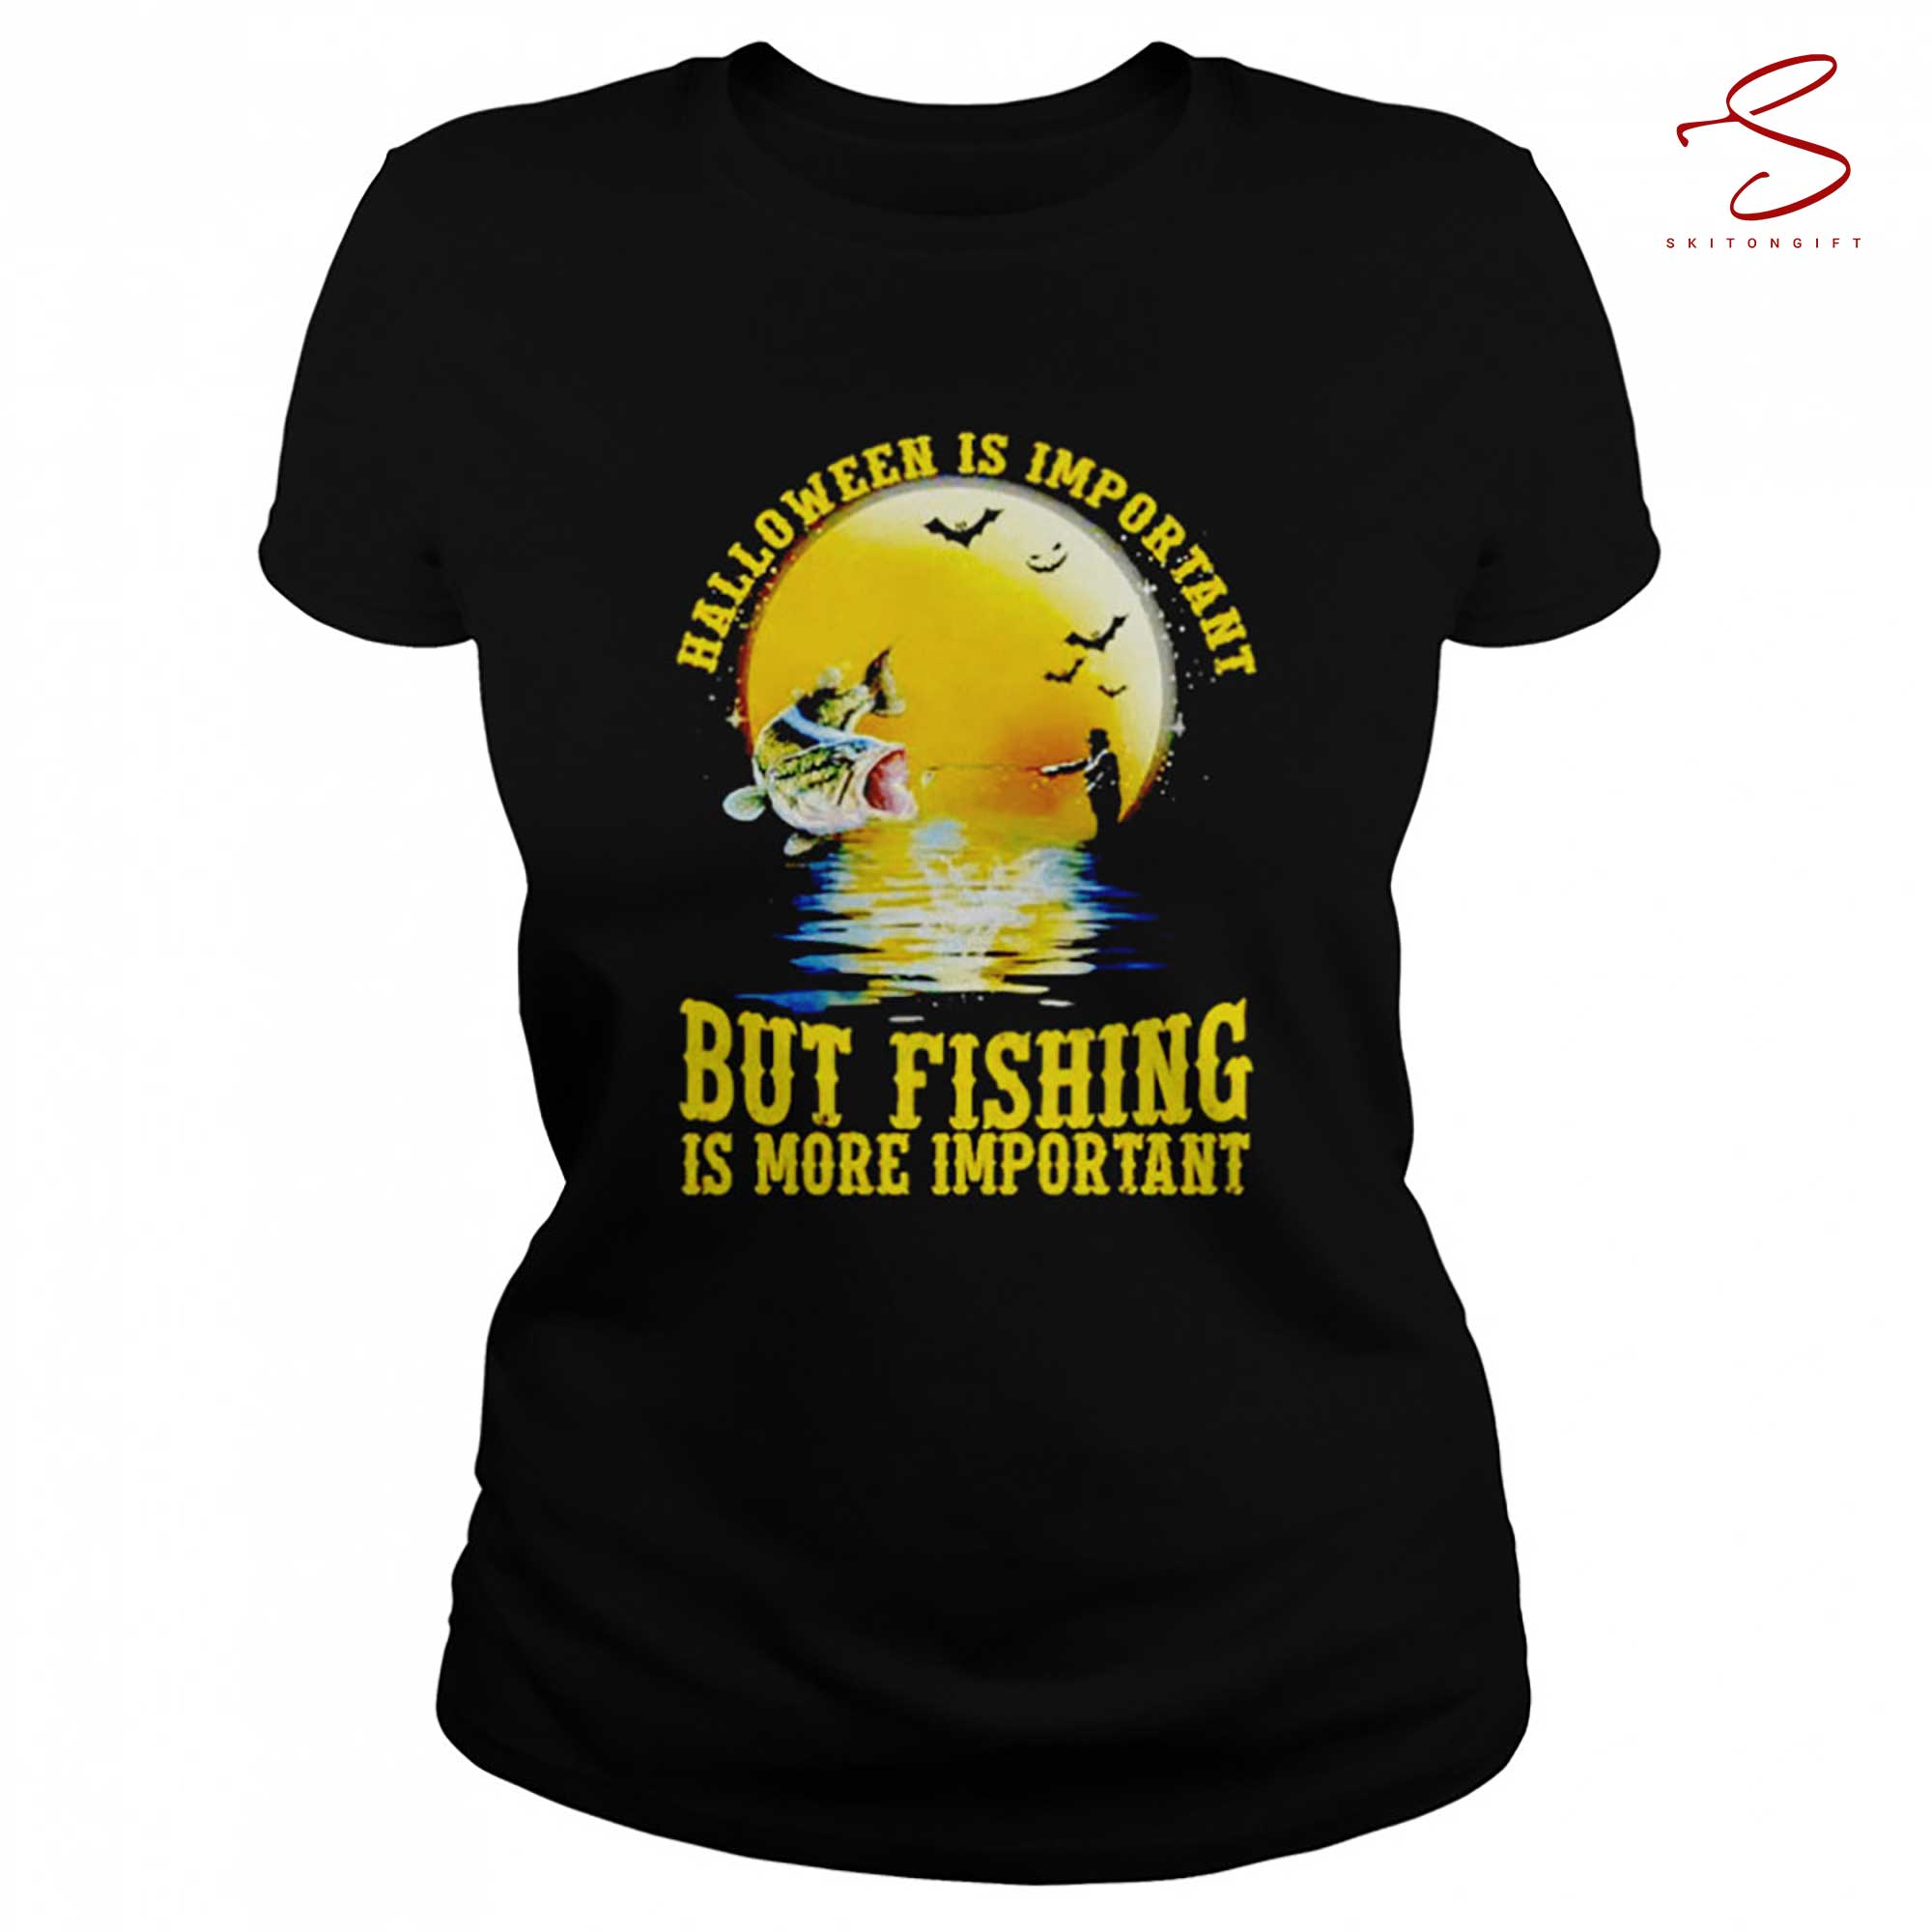 Skitongift Halloween Is Important But Fishing Is More Important Vintage Halloween T Shirt